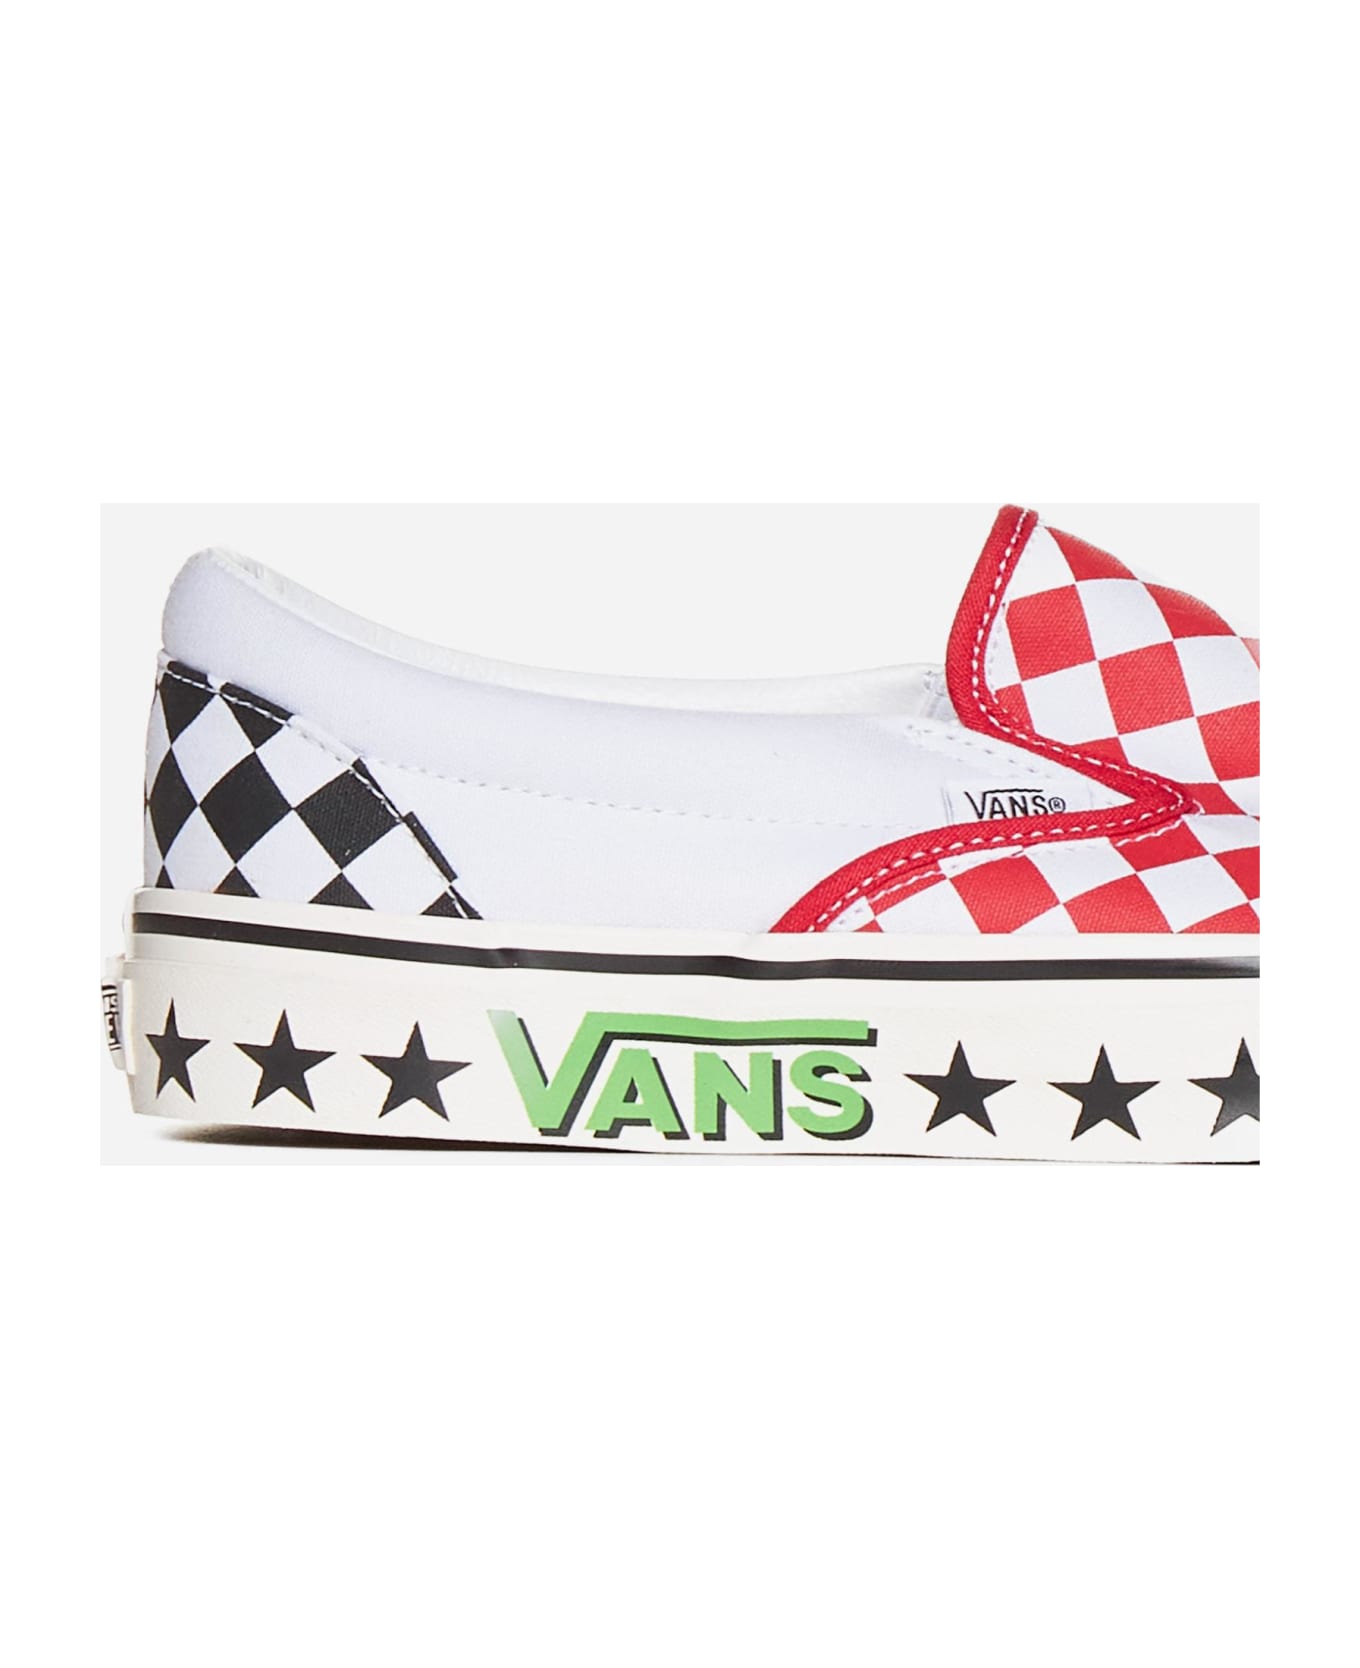 Vans Classic Slip-on 98 Dx Canvas Sneakers - Red/white